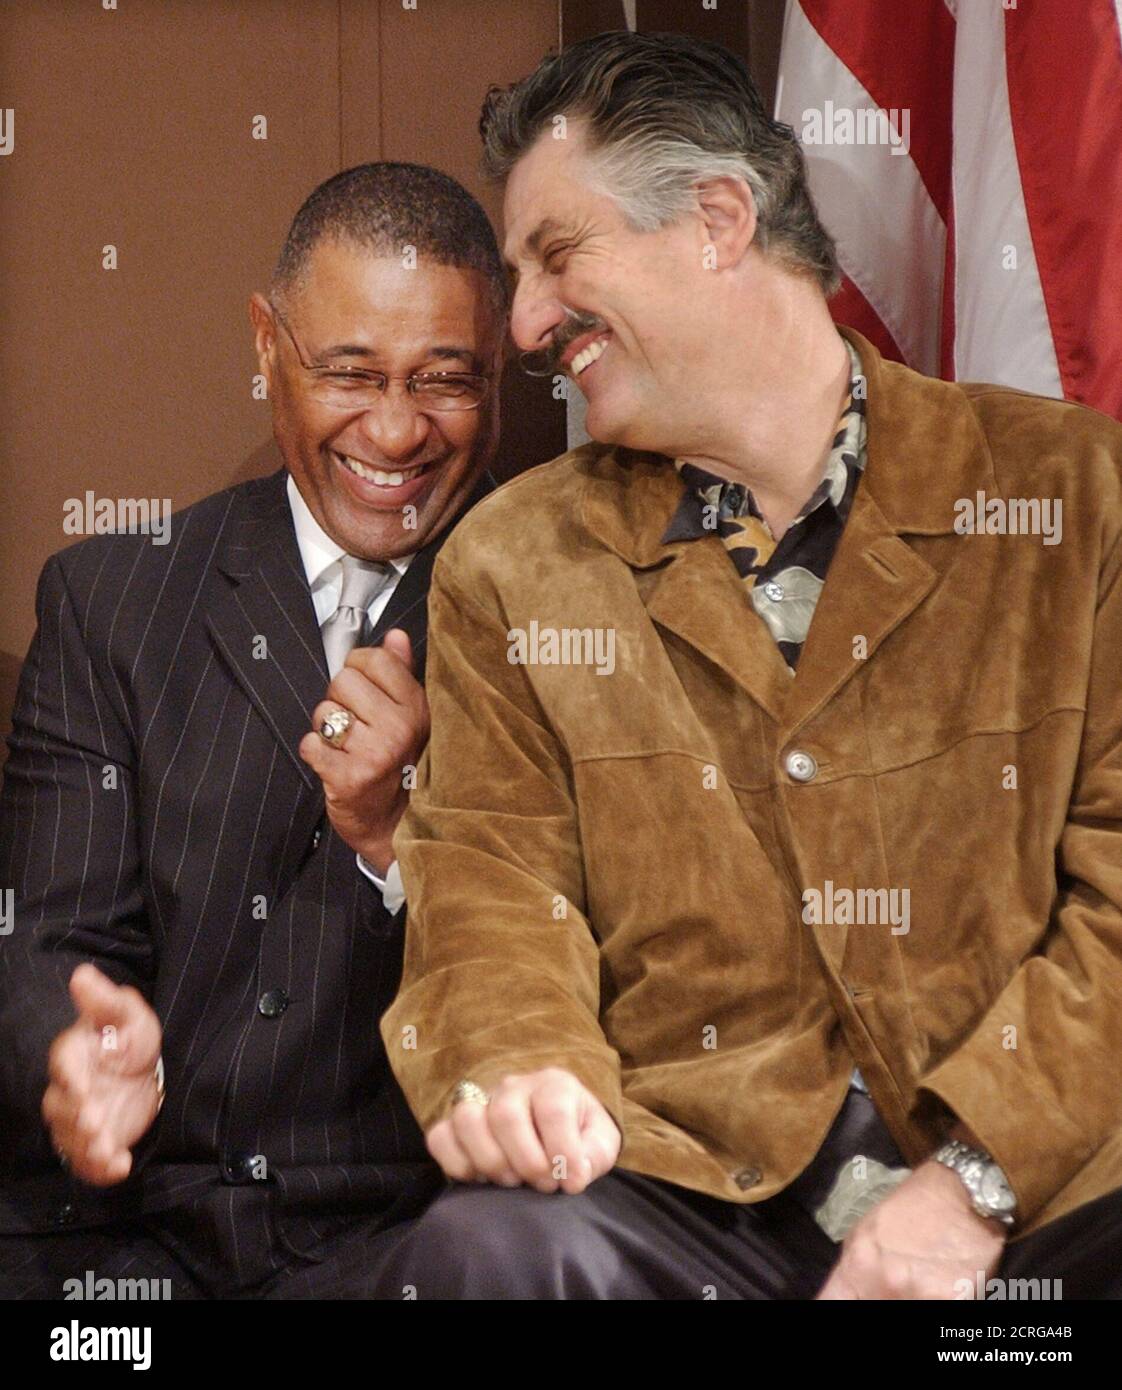 BASEBALL HALL OF FAMERS OZZIE SMITH AND ROLLIE FINGERS HELP OPEN BASEBALL  AS AMERICA EXHIBIT AT MUSEUM OF NATURAL HISTORY IN WASHINGTON. Baseball  Hall of Famers Ozzie Smith (L) and Rollie Fingers